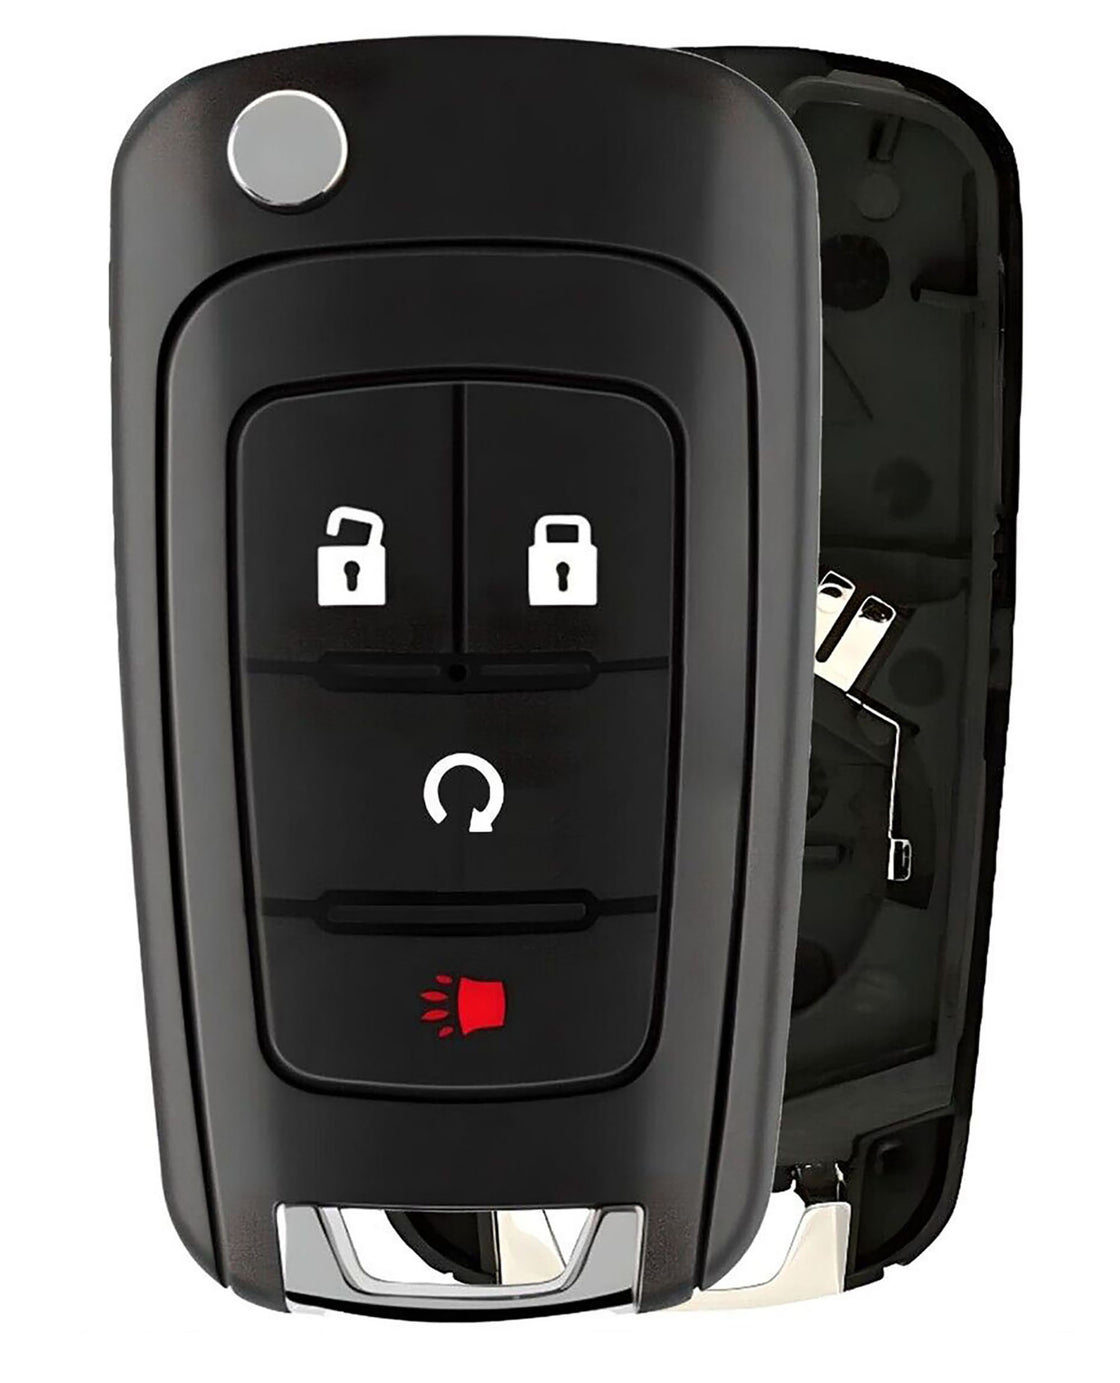 1x New Replacement Key Fob Remote SHELL / CASE Compatible with & Fit For Chevrolet & Buick - MPN KR55WK50073-12 (NO electronics or Chip inside)